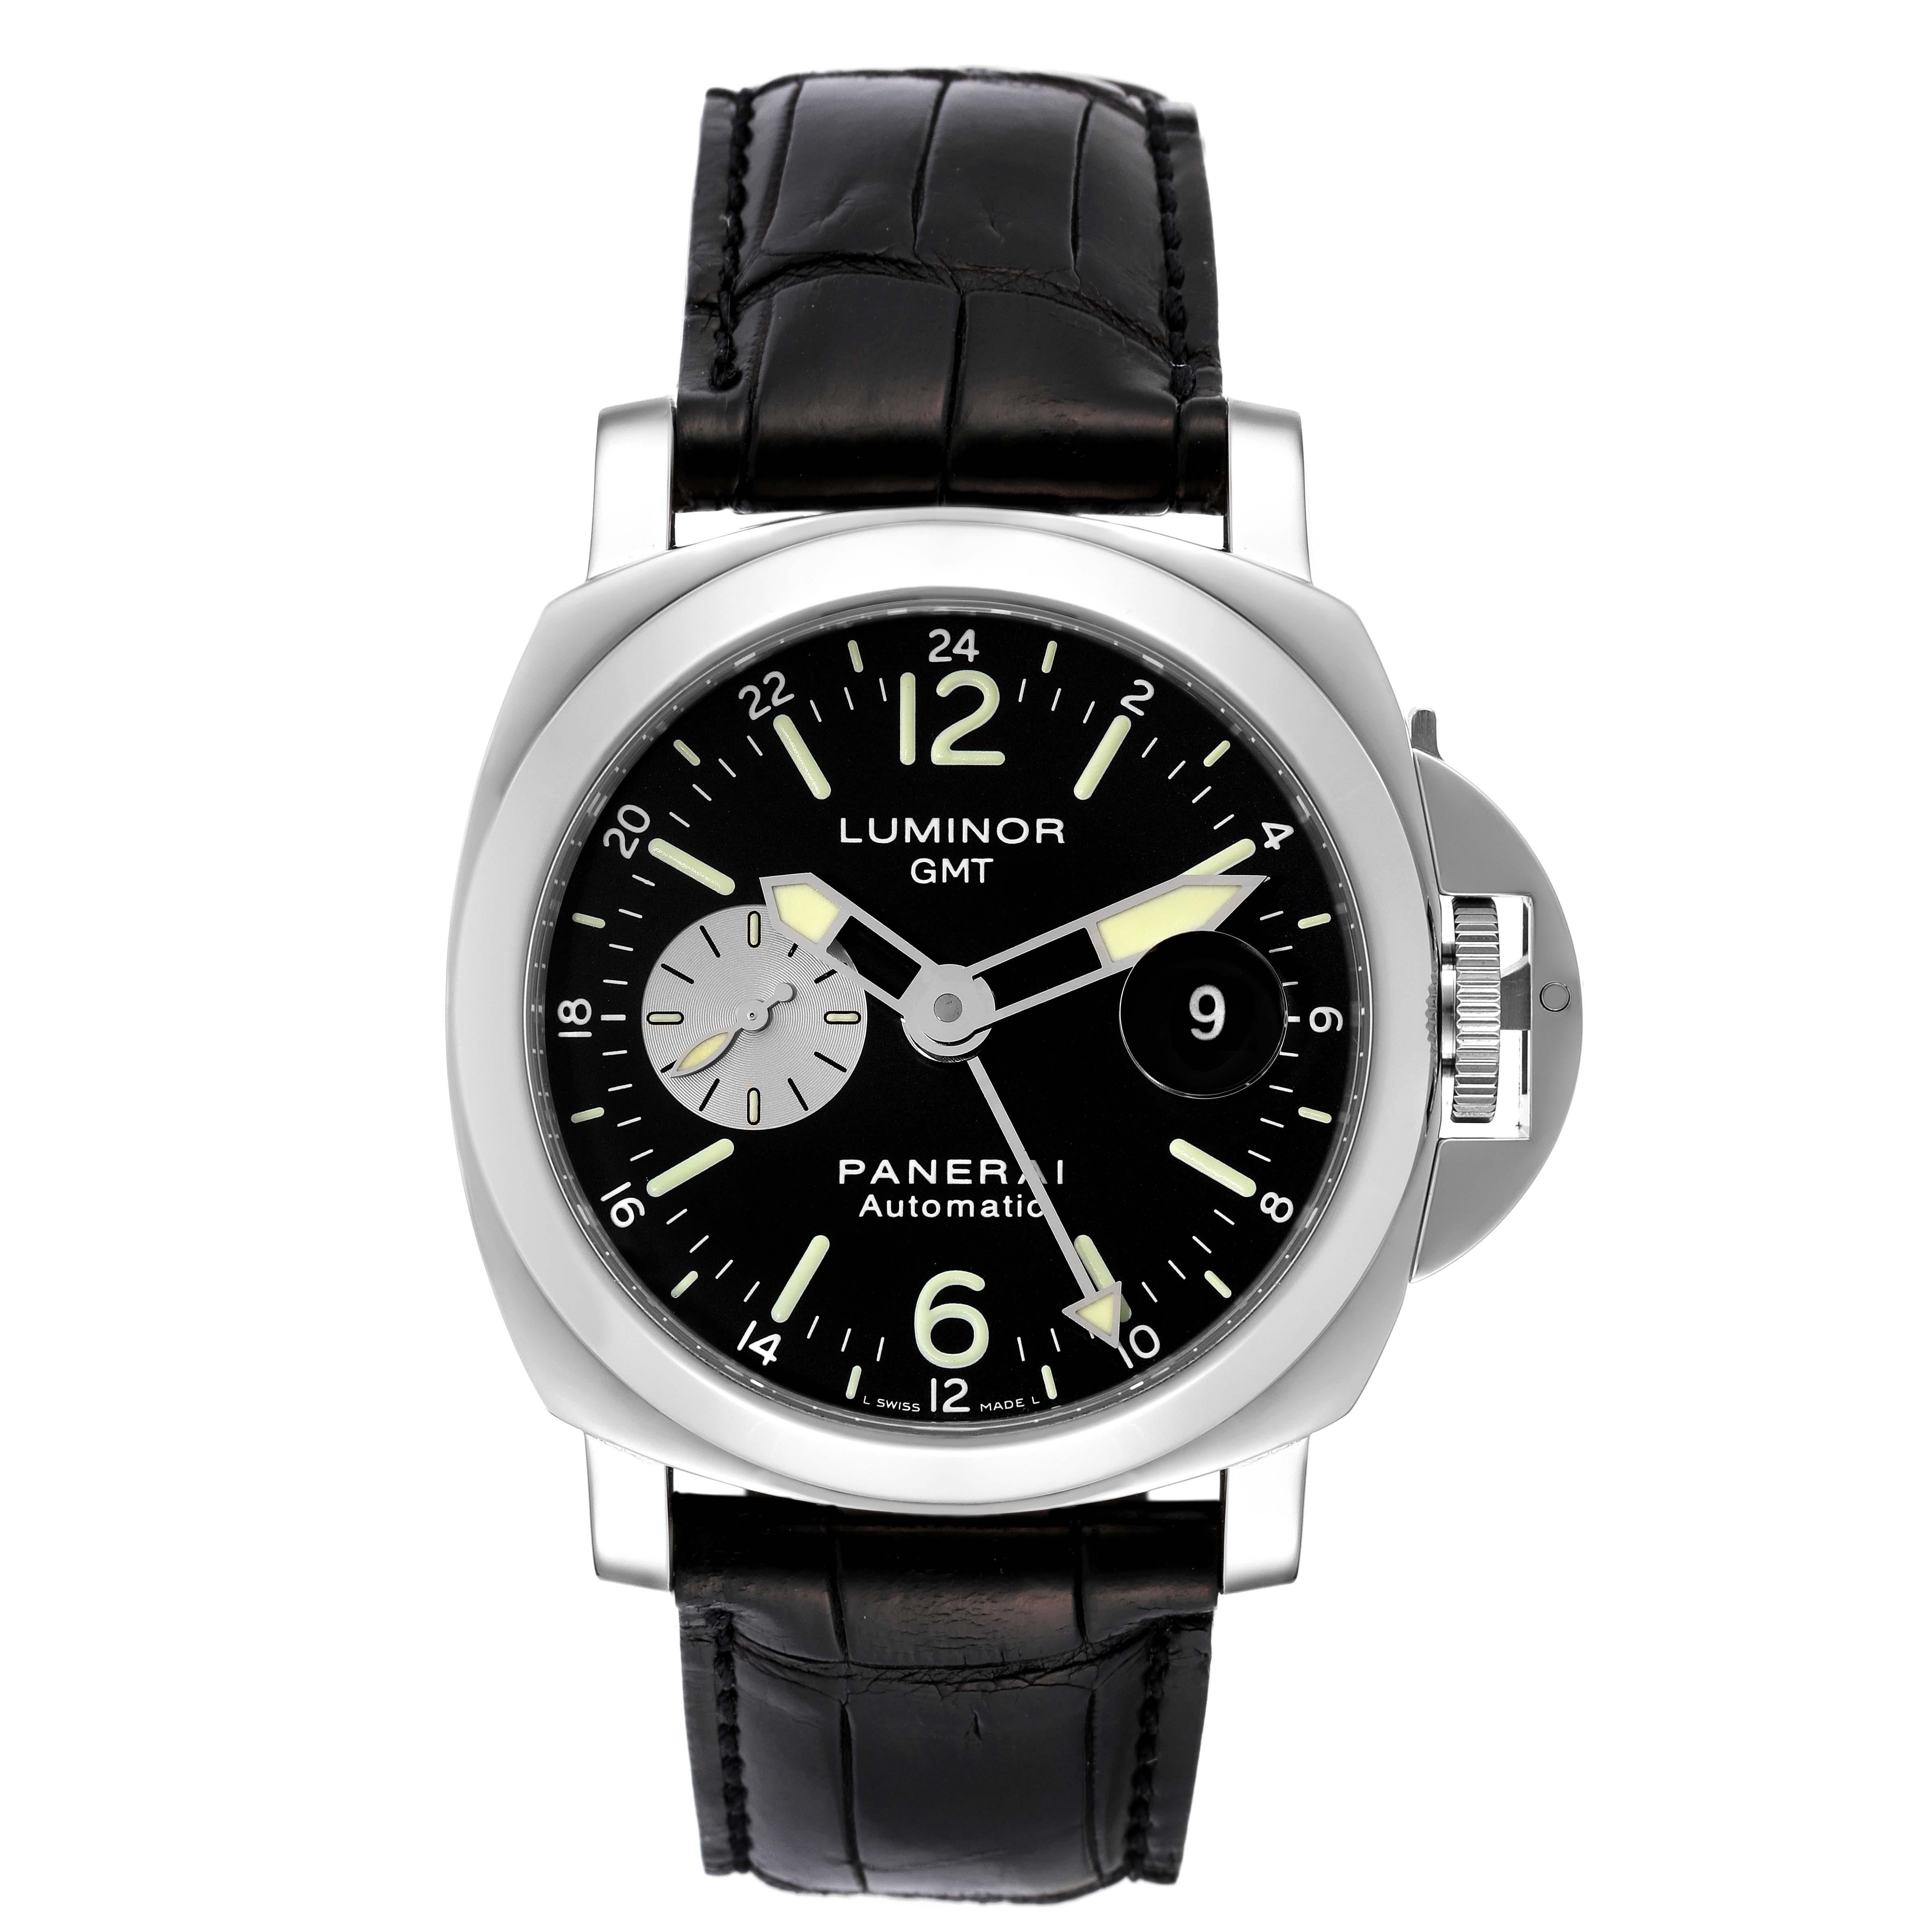 Panerai Luminor GMT Automatic Steel Mens Watch PAM00088 Box Card. Automatic self-winding movement. GMT function. Two part, polished and brushed cushion shaped stainless steel case 44.0 mm in diameter. Polished Panerai patented crown protector.